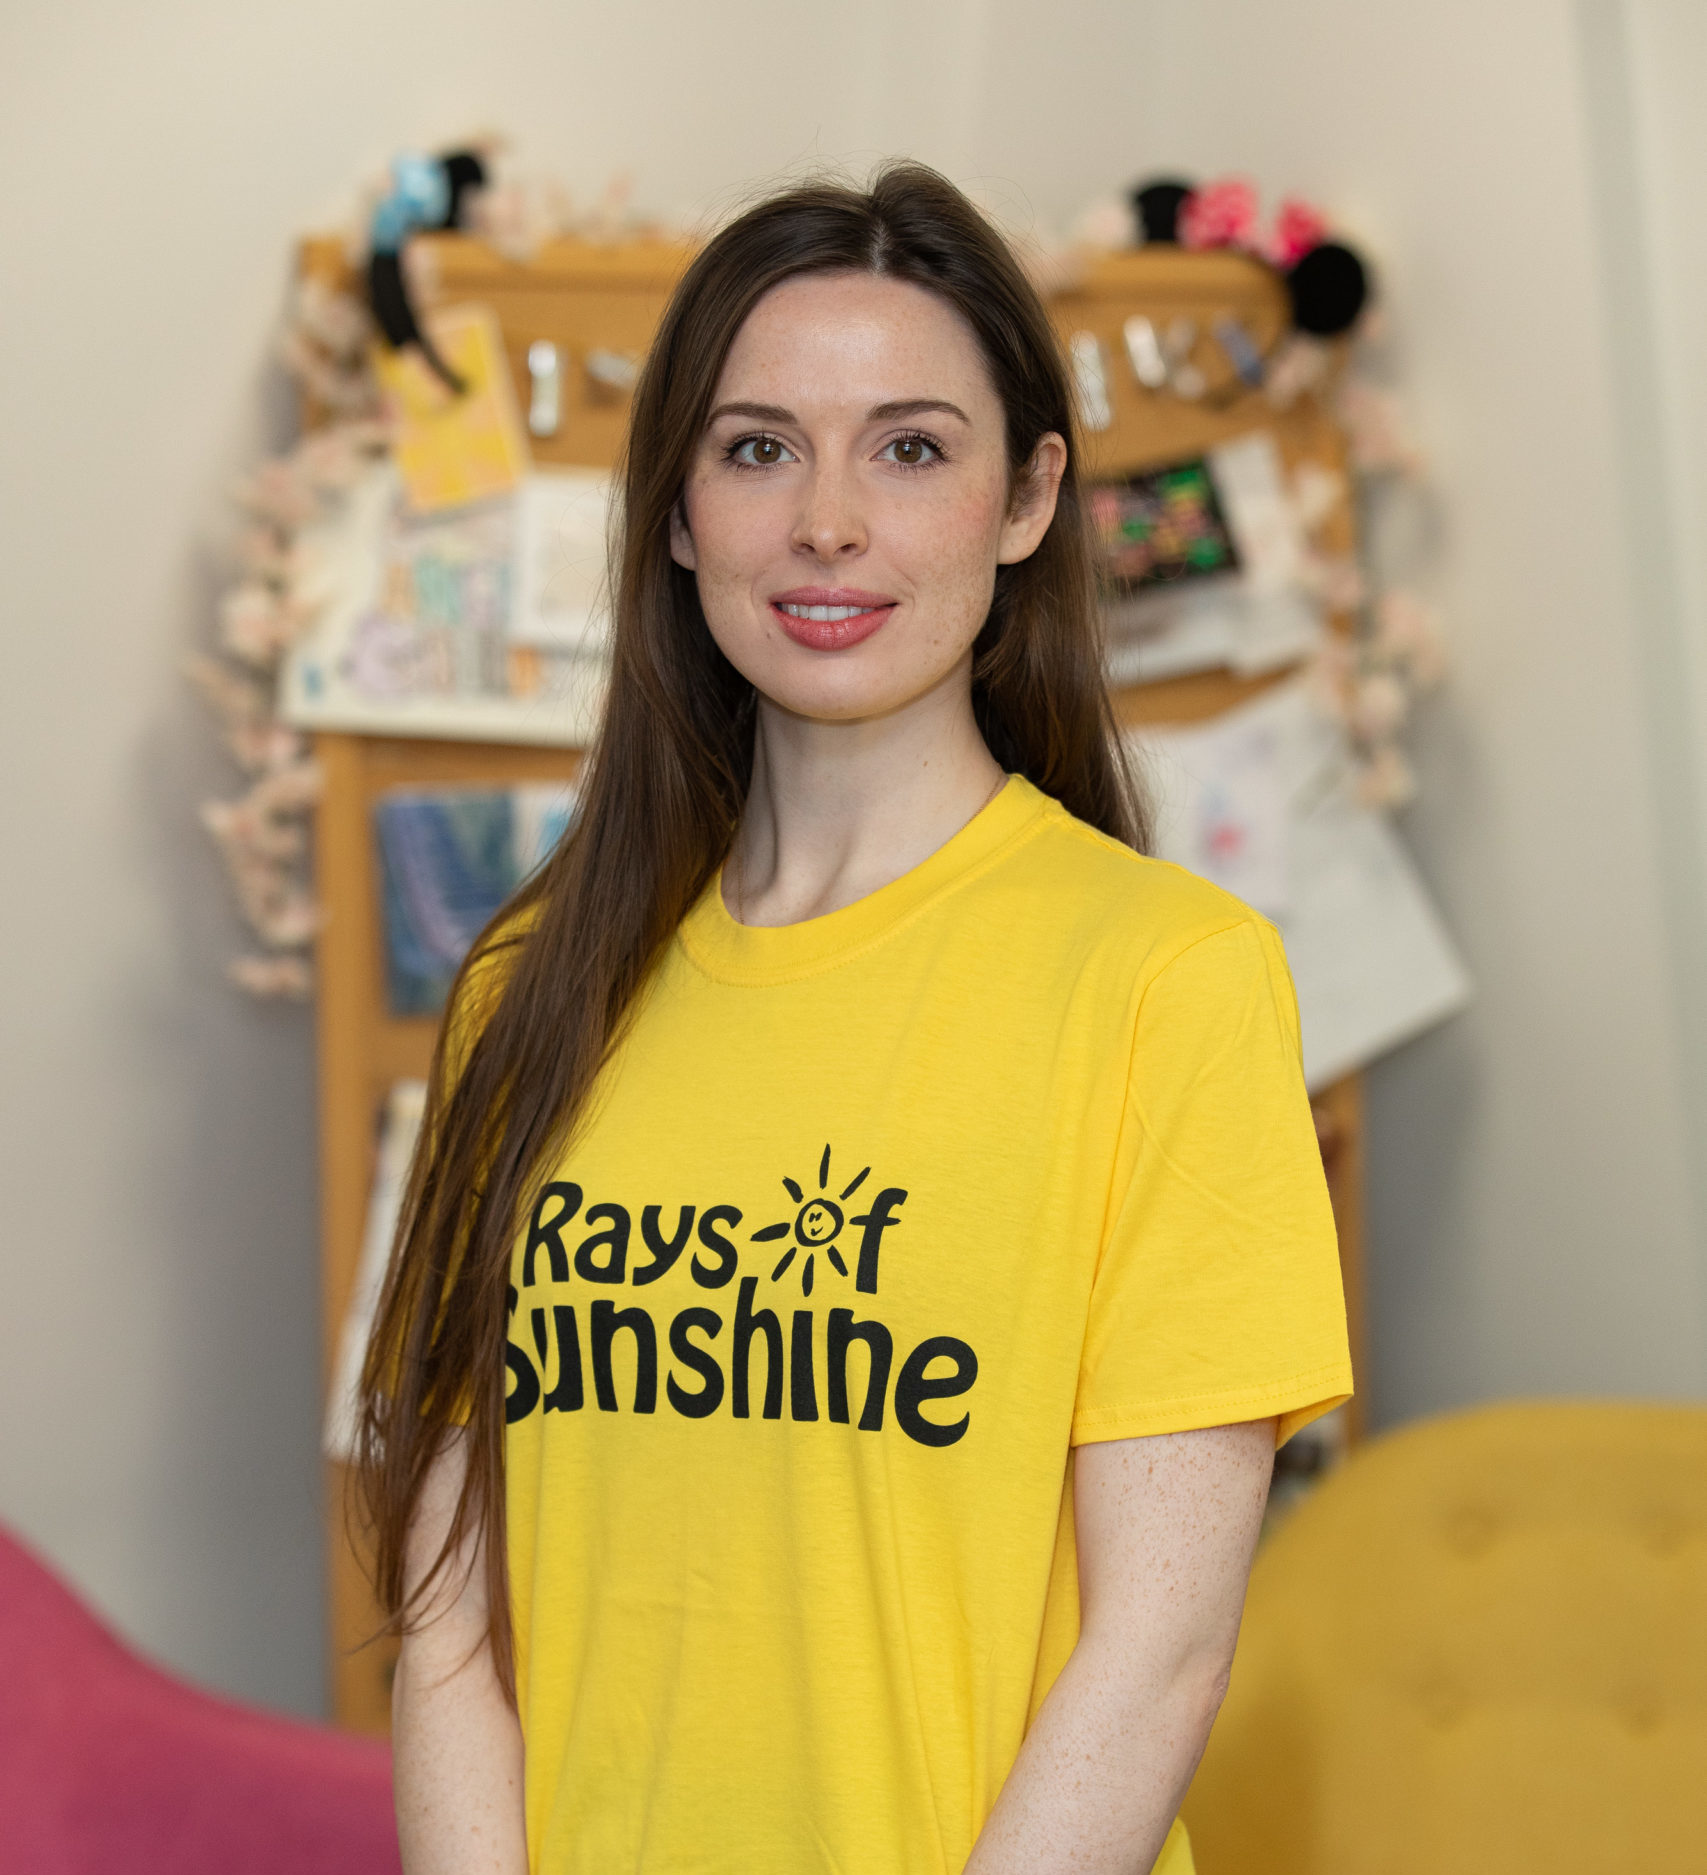 Sophie is wearing a Rays of Sunshine t-shirt. She is standing and has brown hair.